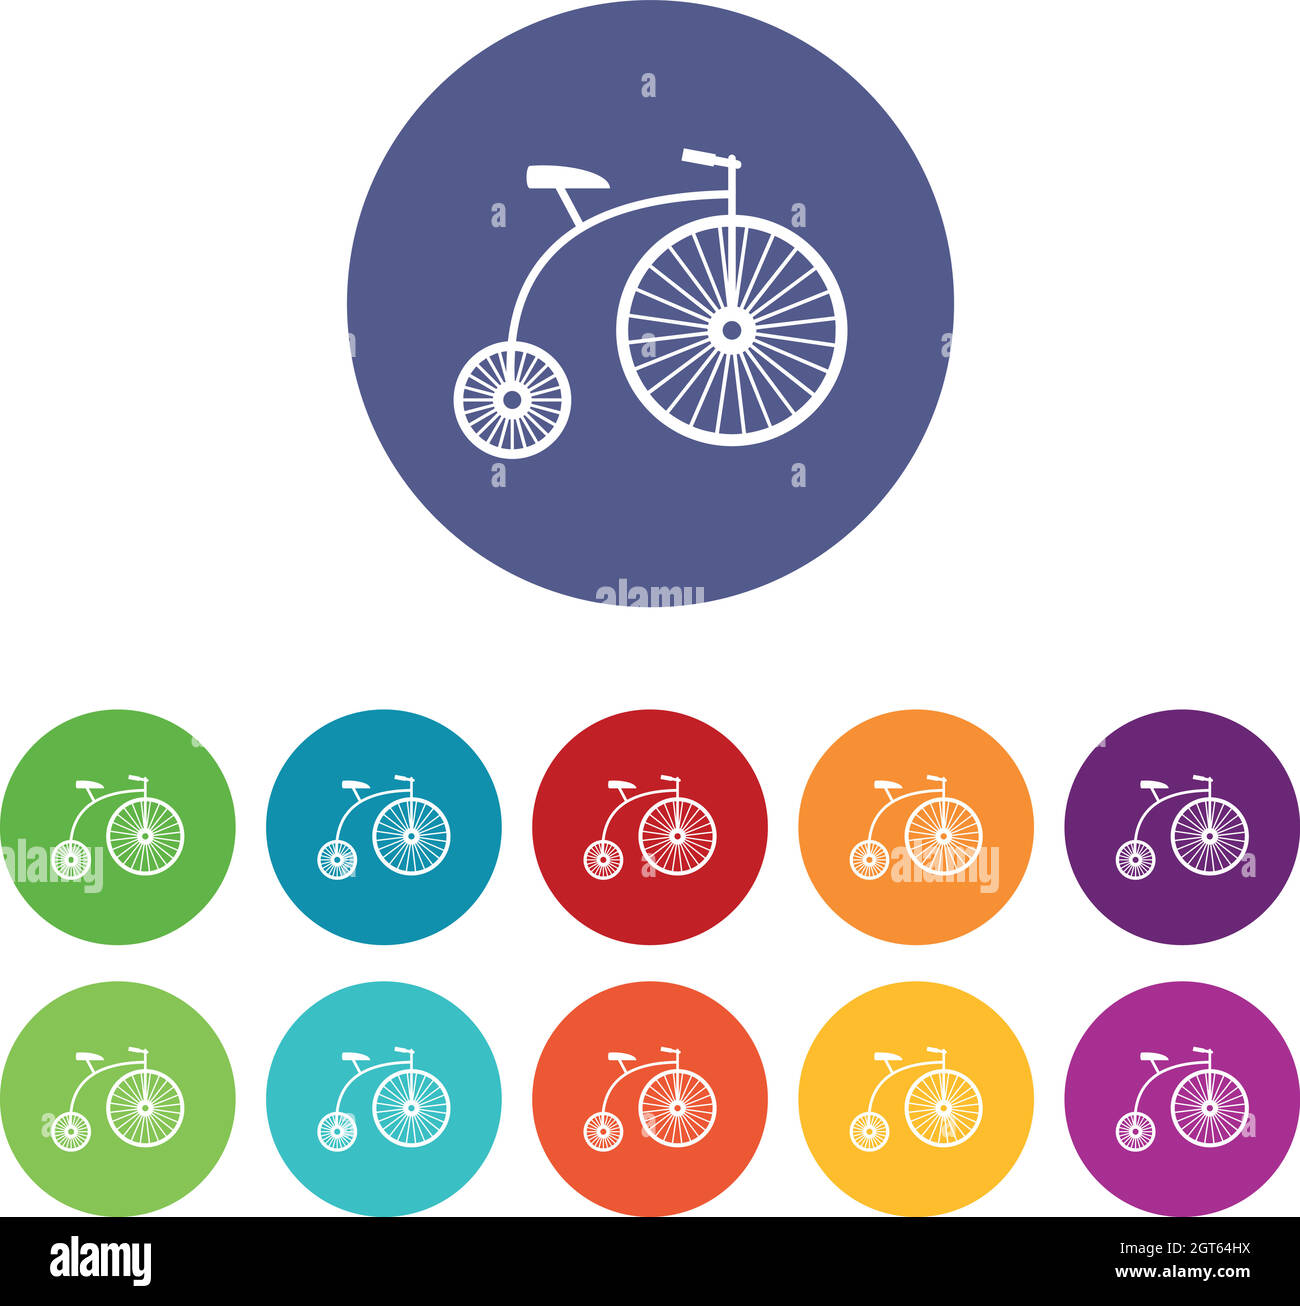 Penny-farthing set icons Stock Vector